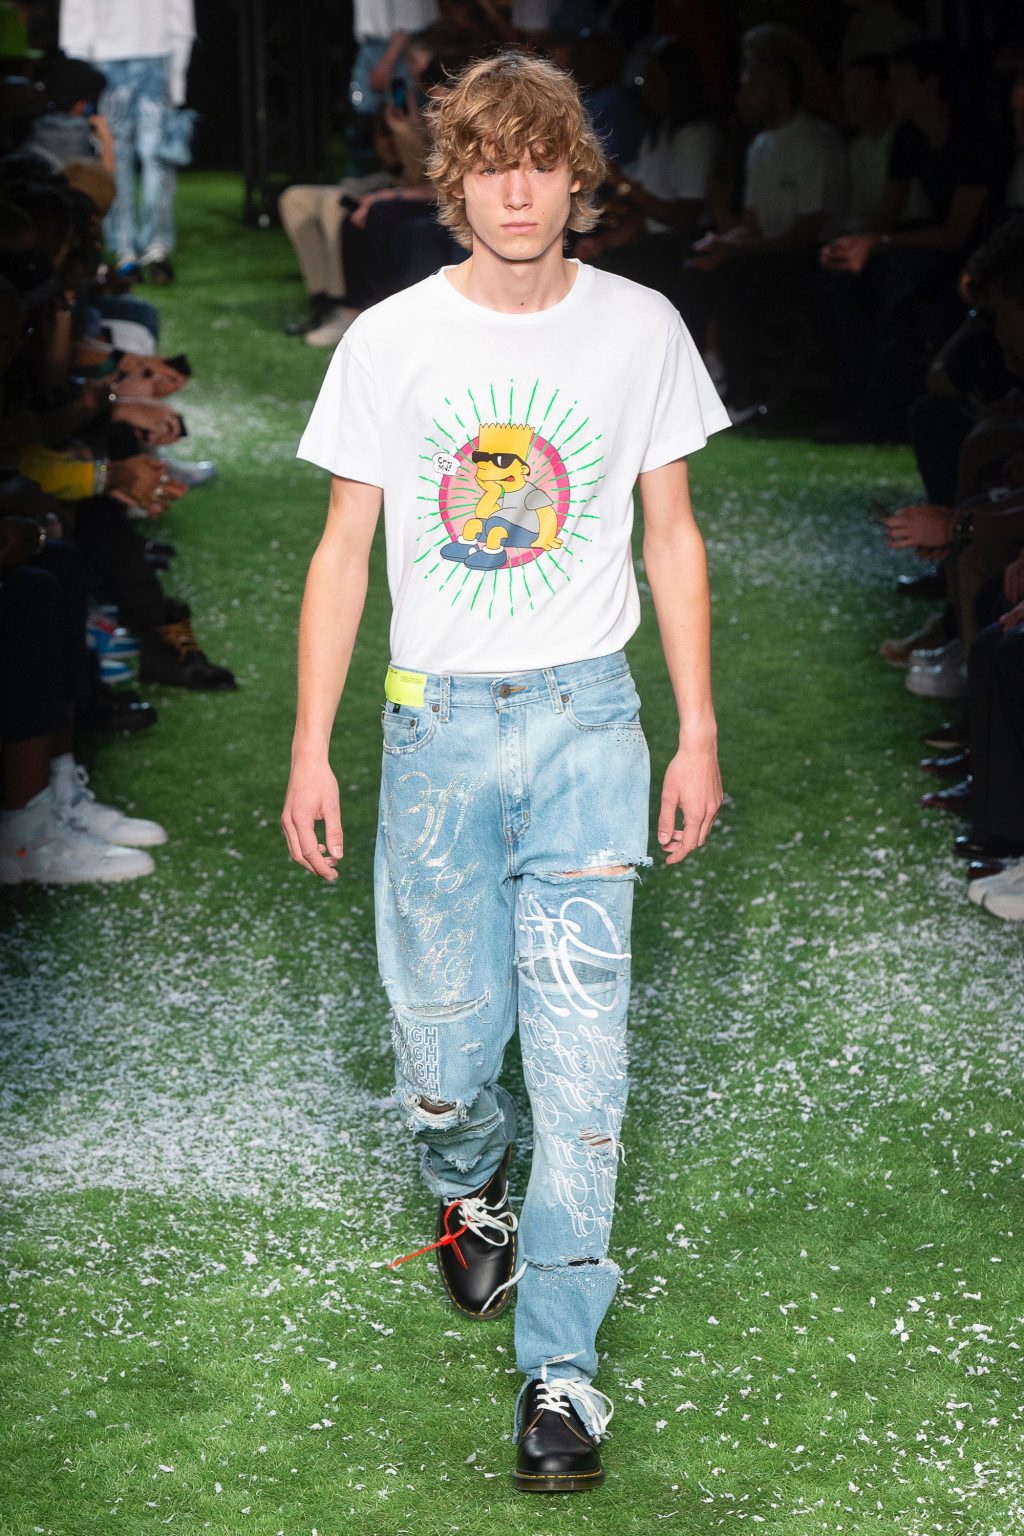 virgil-abloh-off-white-2019-spring-summer-menswear-collection-20180620